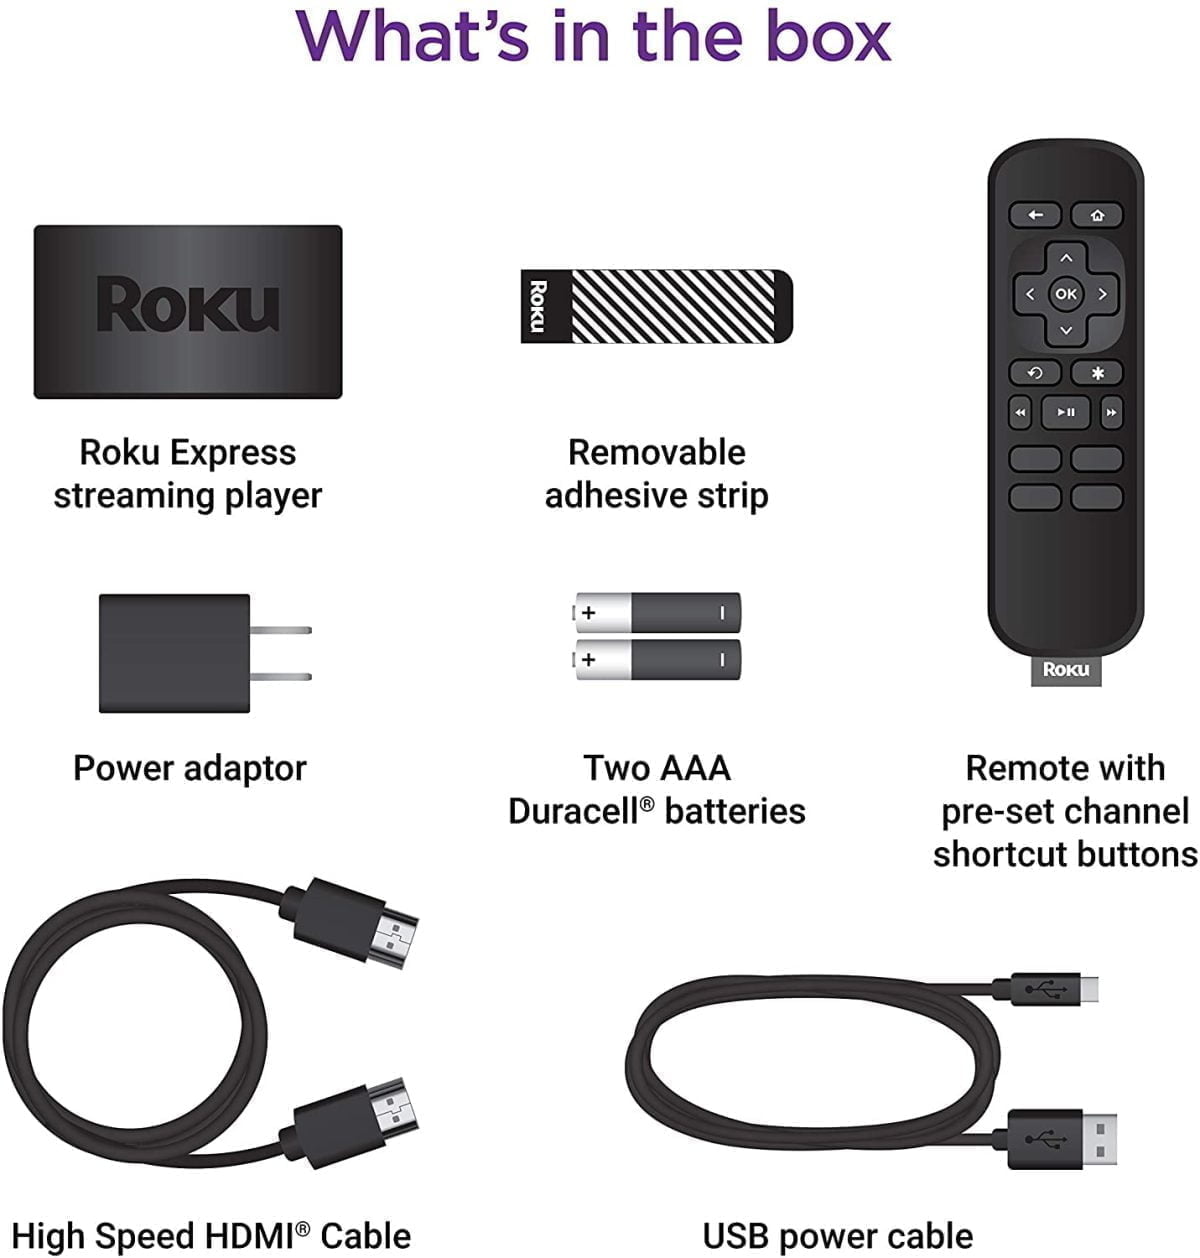 81Cgnp9Kol. Ac Sl1500 Roku &Lt;H1&Gt;Roku Express | Hd Streaming Media Player With High Speed Hdmi Cable And Simple Remote&Lt;/H1&Gt; &Lt;Ul Class=&Quot;A-Unordered-List A-Vertical A-Spacing-Mini&Quot;&Gt; &Lt;Li&Gt;&Lt;Span Class=&Quot;A-List-Item&Quot;&Gt; Streaming Made Easy: Roku Express Lets You Stream Free, Live And Premium Tv Over The Internet Right To Your Tv; It’s Perfect For New Users, Secondary Tvs And Easy Gifting But Powerful Enough For Seasoned Pros &Lt;/Span&Gt;&Lt;/Li&Gt; &Lt;Li&Gt;&Lt;Span Class=&Quot;A-List-Item&Quot;&Gt; Quick And Easy Setup: Just Plug It Into Your Tv With The Included High Speed Hdmi Cable And Connect To The Internet To Get Started &Lt;/Span&Gt;&Lt;/Li&Gt; &Lt;Li&Gt;&Lt;Span Class=&Quot;A-List-Item&Quot;&Gt; Tons Of Power, Tons Of Fun: Compact And Fast, You’ll Stream Your Favorites With Ease; With Movies And Series On Apple Tv+, Prime Video, Netflix, Disney+, Hbo Max, Showtime, And Hulu With Live Tv, Enjoy The Most Talked About Entertainment &Lt;/Span&Gt;&Lt;/Li&Gt; &Lt;Li&Gt;&Lt;Span Class=&Quot;A-List-Item&Quot;&Gt; Simple Remote: Incredibly Easy To Use, This Remote Features Shortcut Buttons To Popular Streaming Channels &Lt;/Span&Gt;&Lt;/Li&Gt; &Lt;Li&Gt;&Lt;Span Class=&Quot;A-List-Item&Quot;&Gt; Endless Entertainment: Stream It All, Including Free Tv, Live News, Sports, And More; Never Miss Award-Winning Shows, The Latest Blockbuster Hits, And More; Access 500, 000+ Movies And Tv Episodes; Stream What You Love And Cut Back On Cable Tv Bills &Lt;/Span&Gt;&Lt;/Li&Gt; &Lt;Li&Gt;&Lt;Span Class=&Quot;A-List-Item&Quot;&Gt; Enjoy Free Tv Channels: Stream Live Tv, 24/7 News, Sports, Movies, Shows, And More On The Roku Channel, Plus A Huge Collection Of Free Entertainment From Top Channels On Featured Free &Lt;/Span&Gt;&Lt;/Li&Gt; &Lt;/Ul&Gt; &Lt;Div Class=&Quot;A-Row A-Expander-Container A-Expander-Inline-Container&Quot;&Gt; &Lt;Div Class=&Quot;A-Expander-Content A-Expander-Extend-Content A-Expander-Content-Expanded&Quot;&Gt; &Lt;Ul Class=&Quot;A-Unordered-List A-Vertical A-Spacing-None&Quot;&Gt; &Lt;Li&Gt;&Lt;Span Class=&Quot;A-List-Item&Quot;&Gt;The Free Roku Mobile App: Turn Your Ios Or Android Device Into The Ultimate Streaming Companion; Control Your Roku Express Media Player Or Roku Tv, Use Voice Search, Enjoy Private Listening, And More On Ios And Android&Lt;/Span&Gt;&Lt;/Li&Gt; &Lt;Li&Gt;&Lt;Span Class=&Quot;A-List-Item&Quot;&Gt;Automatic Software Updates: Get The Most Up To Date Software Including All The Latest Features And Available Channels Without Even Thinking About It&Lt;/Span&Gt;&Lt;/Li&Gt; &Lt;Li&Gt;&Lt;Span Class=&Quot;A-List-Item&Quot;&Gt;Works With Popular Voice Assistants: Enjoy Easy Voice Control With Siri, Alexa, Or Hey Google&Lt;/Span&Gt;&Lt;/Li&Gt; &Lt;/Ul&Gt; &Lt;/Div&Gt; &Lt;/Div&Gt; Roku Express Roku Express | Hd Streaming Media Player With High Speed Hdmi Cable And Simple Remote